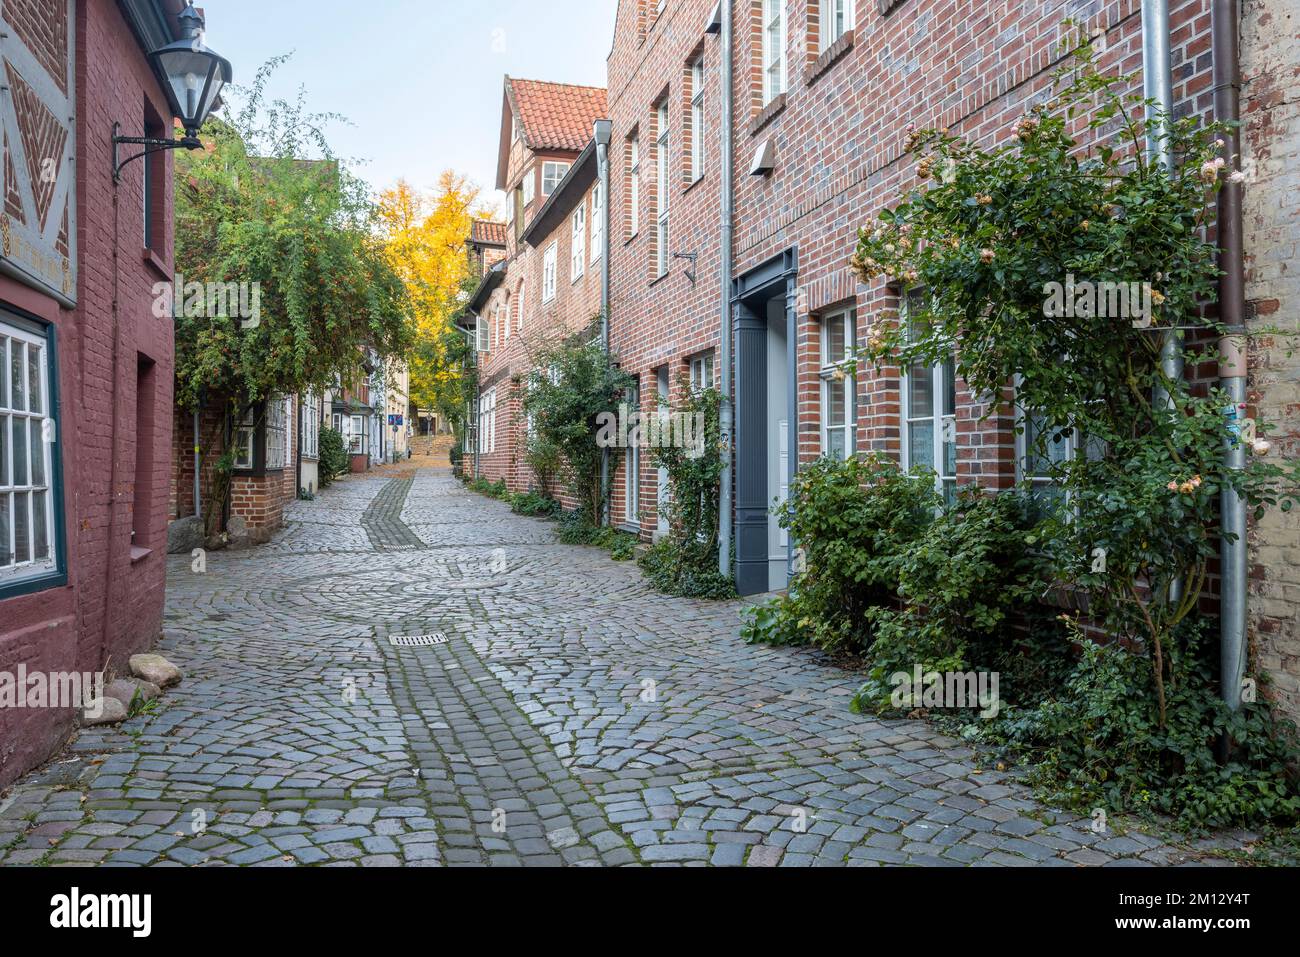 View of the street Auf dem Meere in the historic old town of Lüneburg Stock Photo